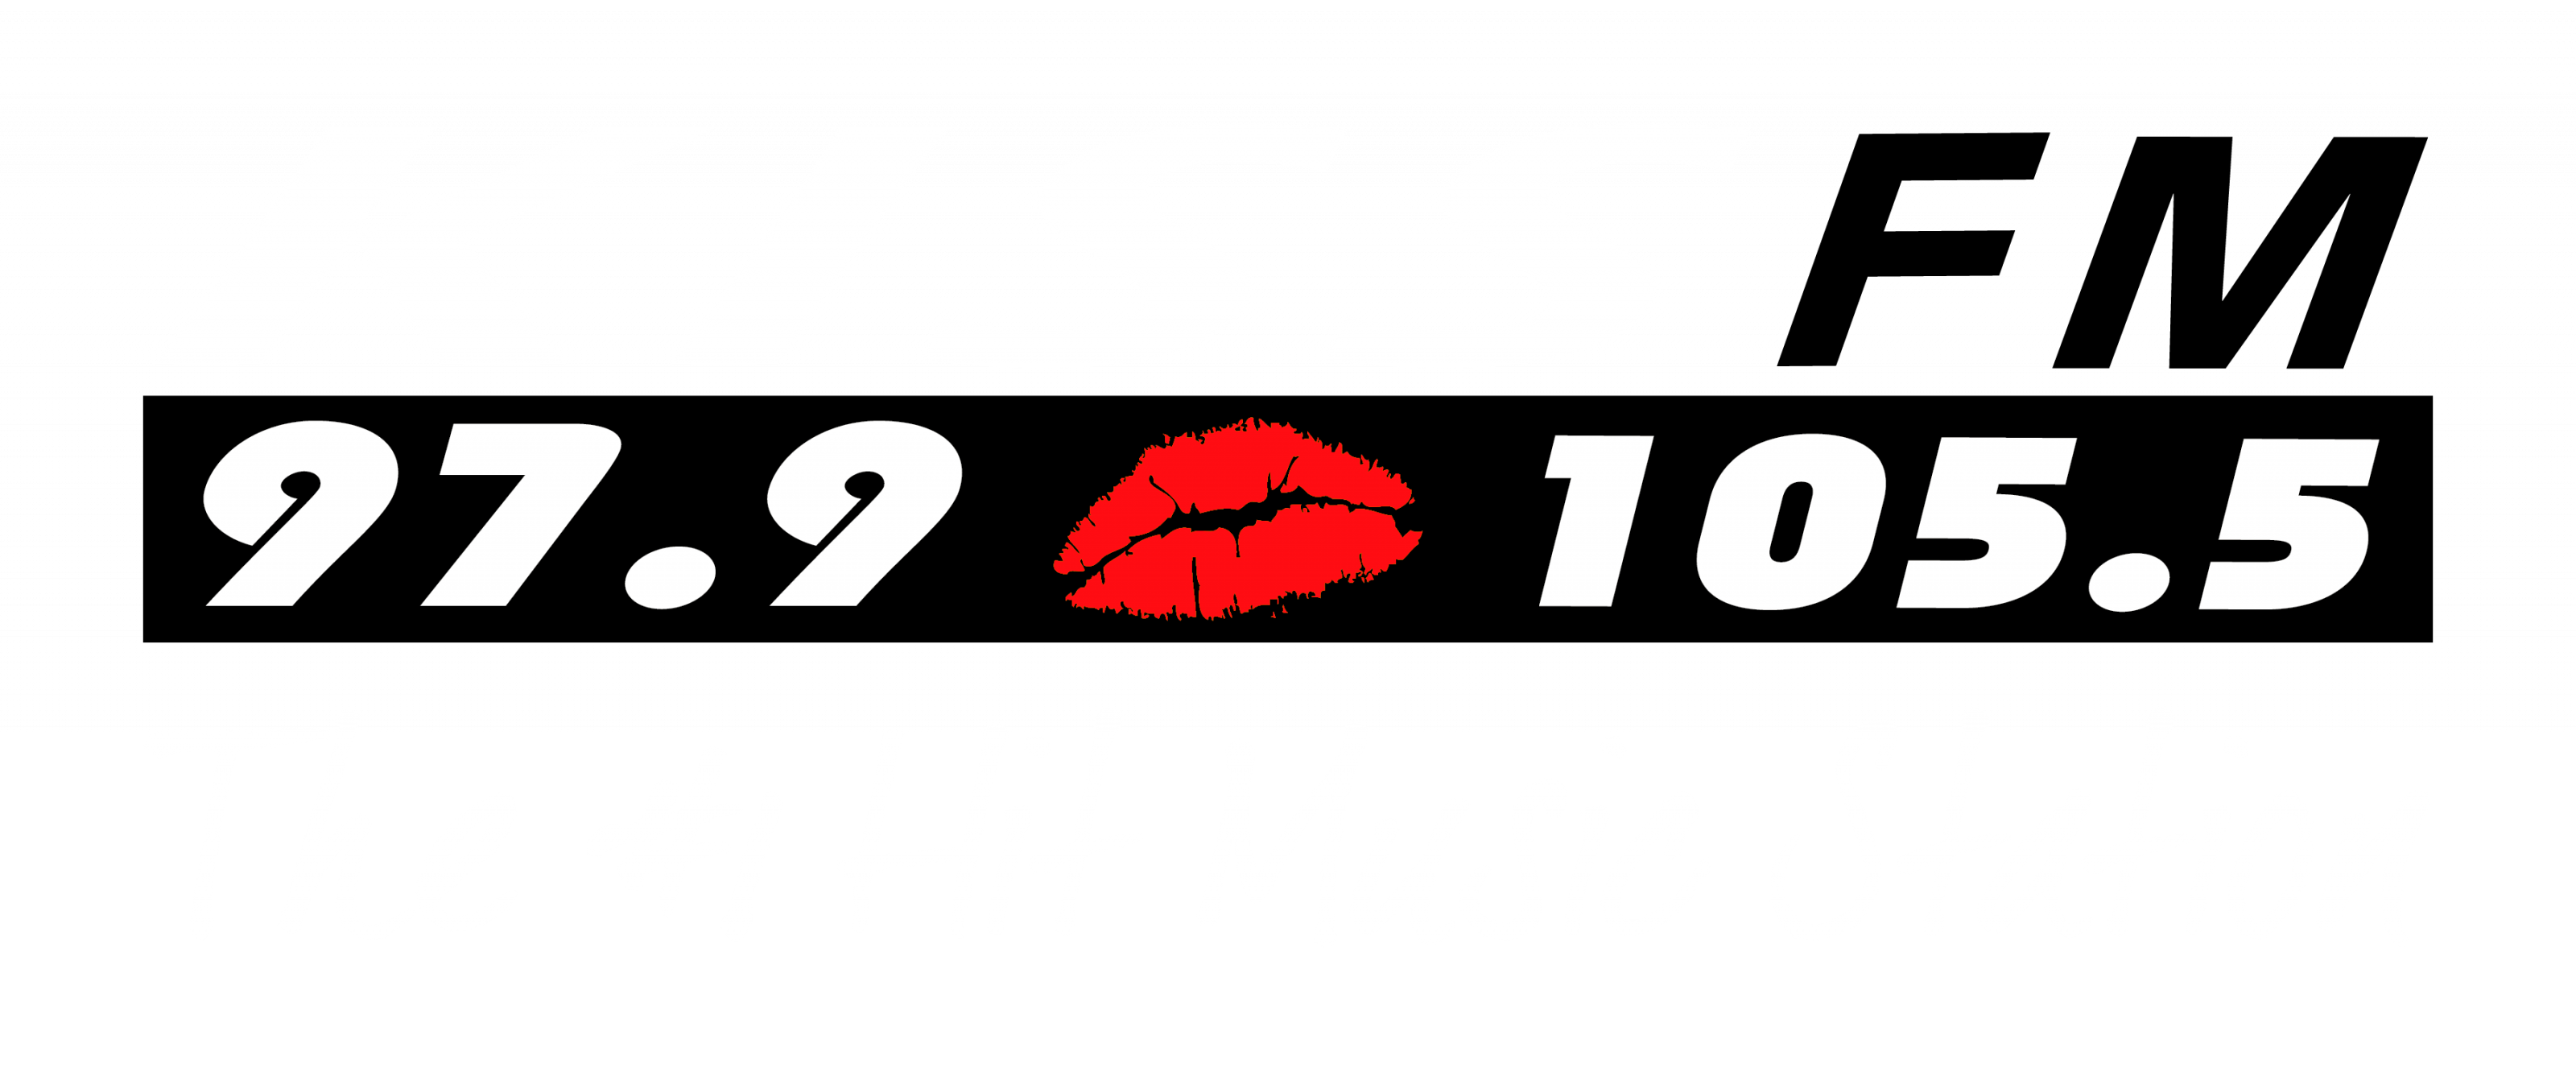 97.9/105.5 KISS-FM The #1 Hit Music Station